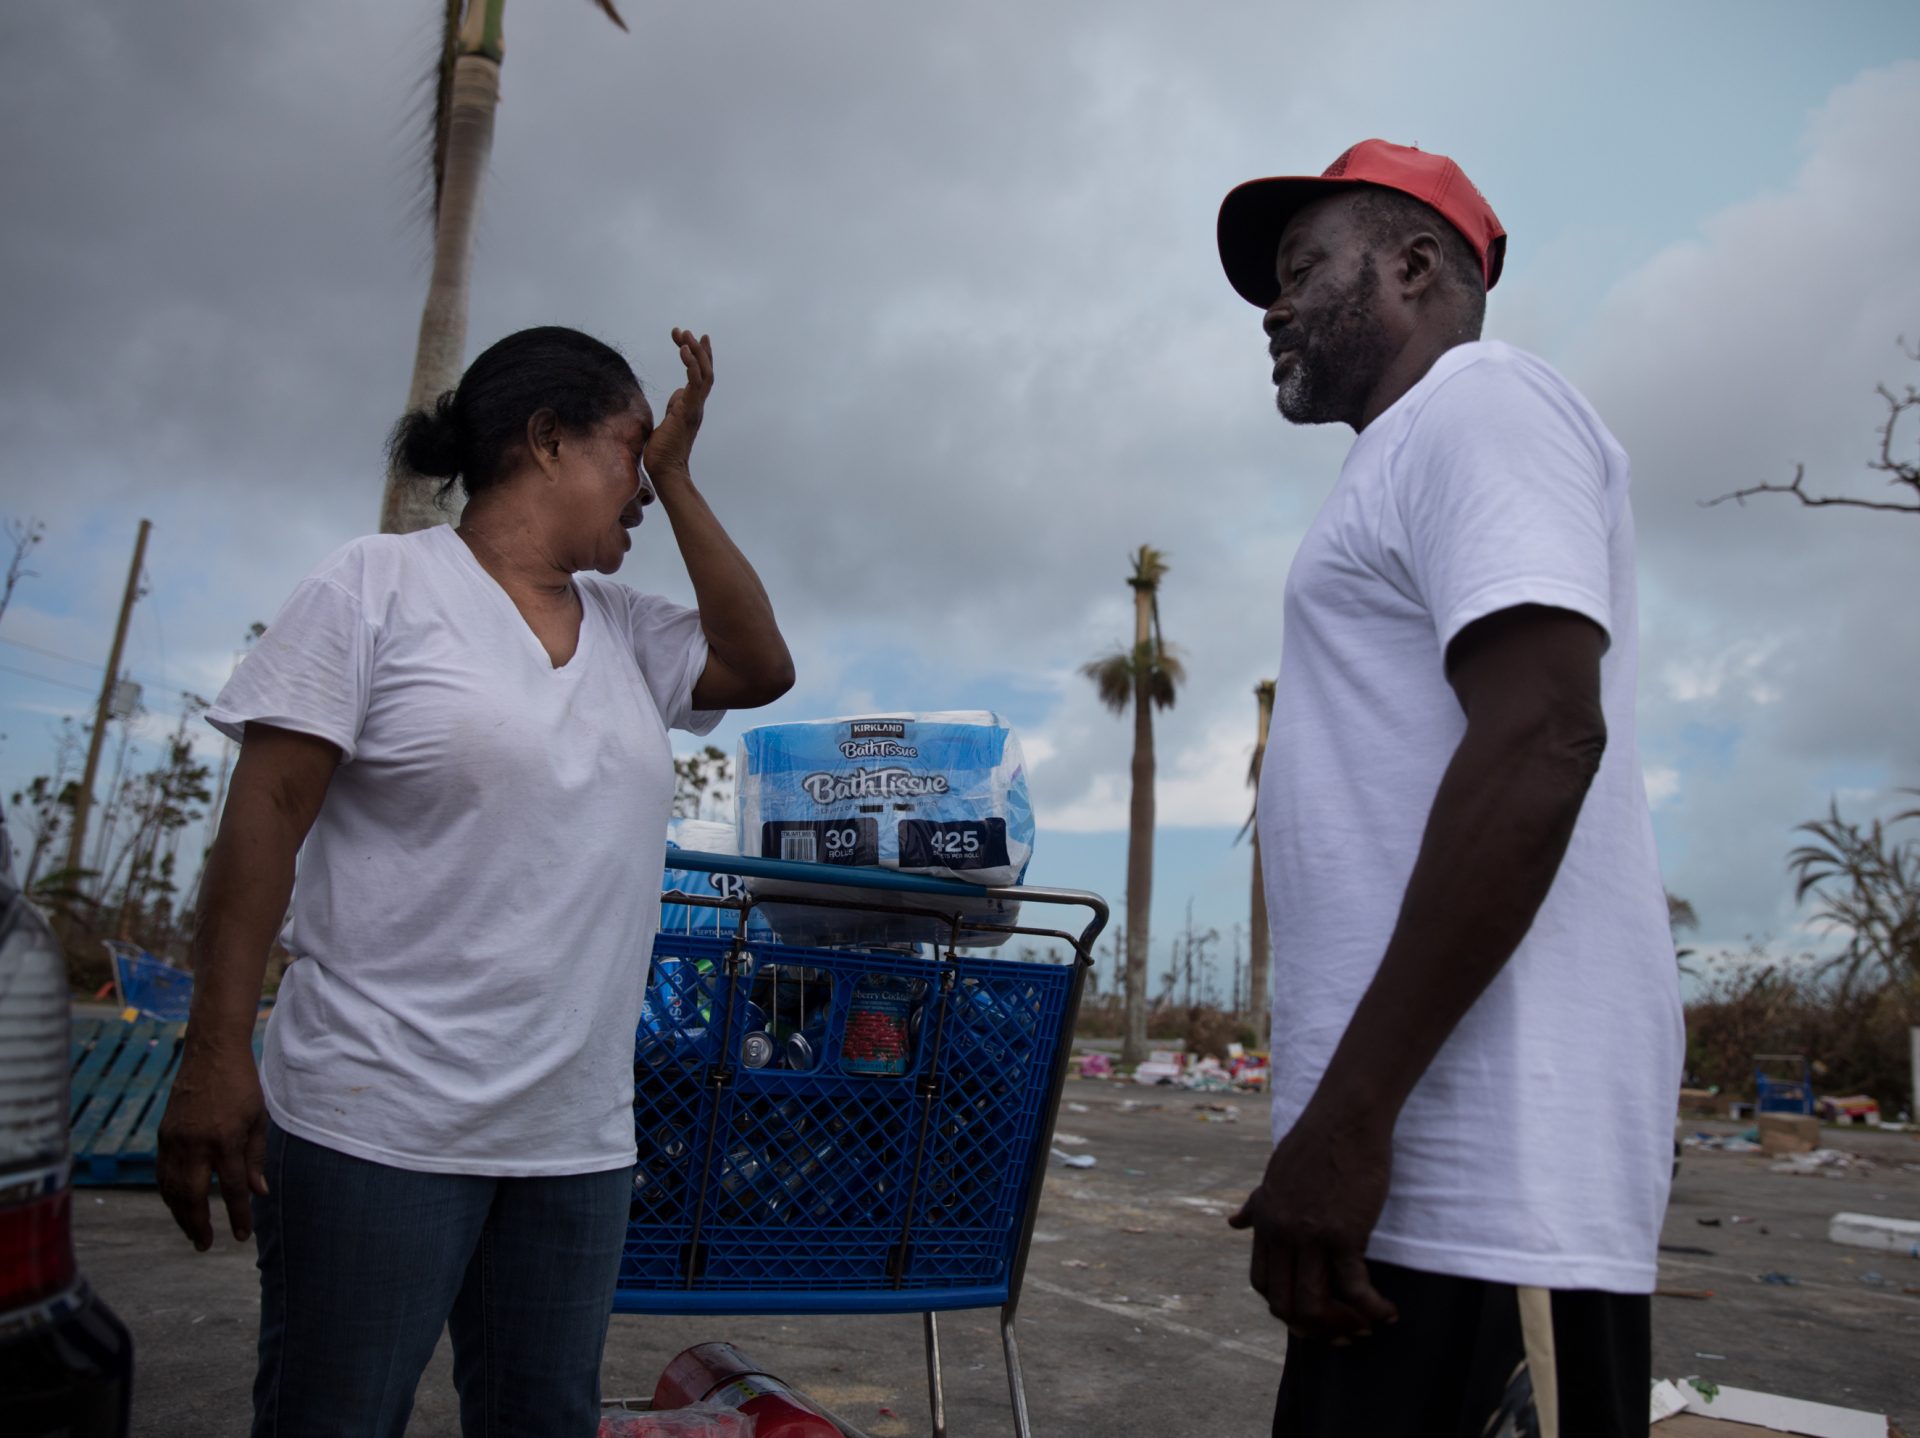 Judy Roker chats with friend John Battles Tate after stocking up on basic provisions, like water, toilet paper and canned goods from Abaco Groceries in Marsh Harbour.